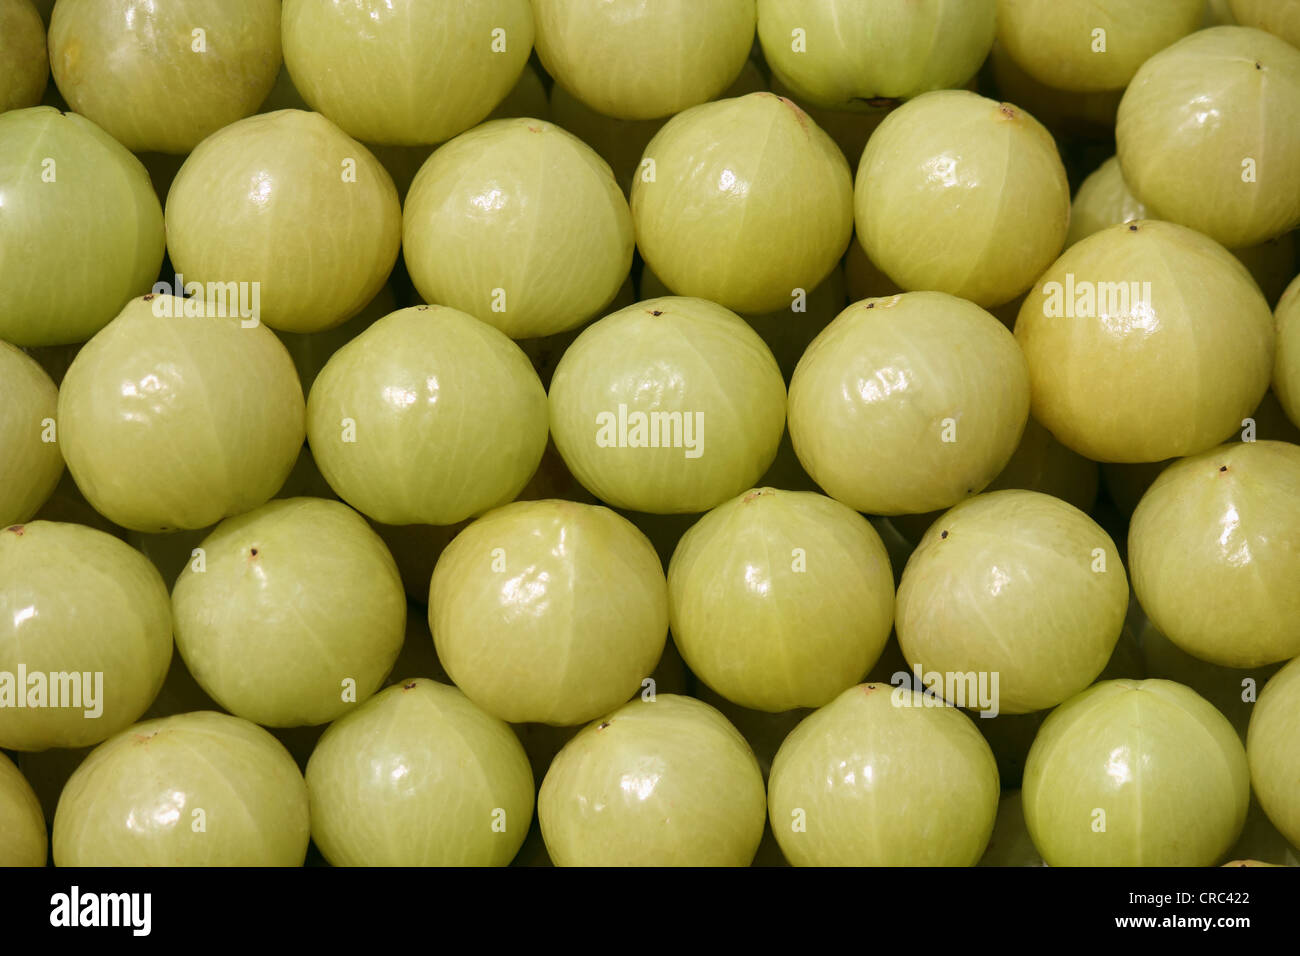 Indian gooseberry (Phyllanthus emblica), also know as aamla Stock Photo